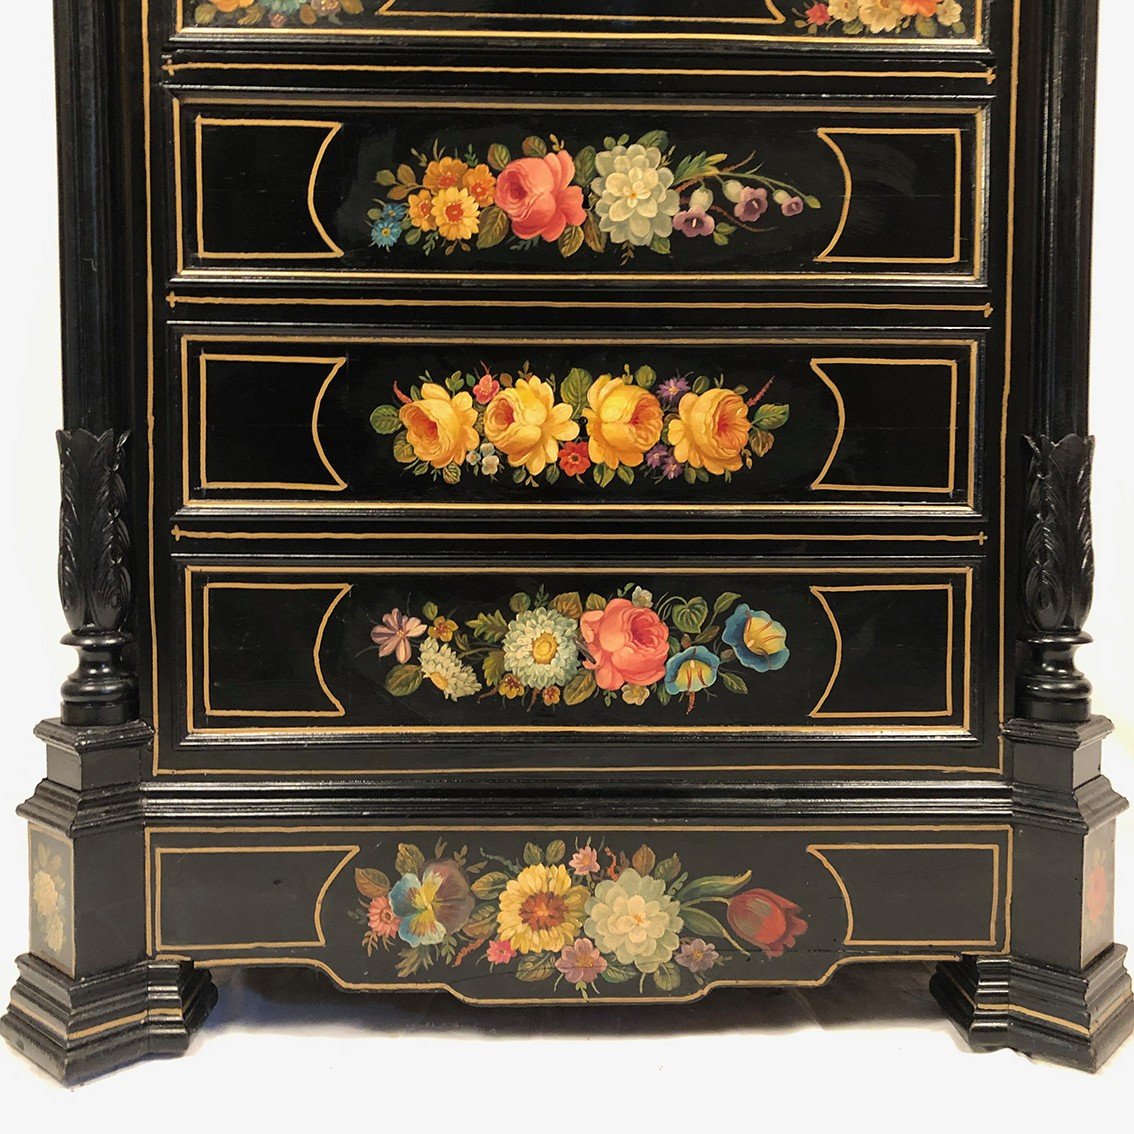 Secretary In Lacquered Wood With Rich Flower Decorations On A Black Background, 19th Century-photo-3